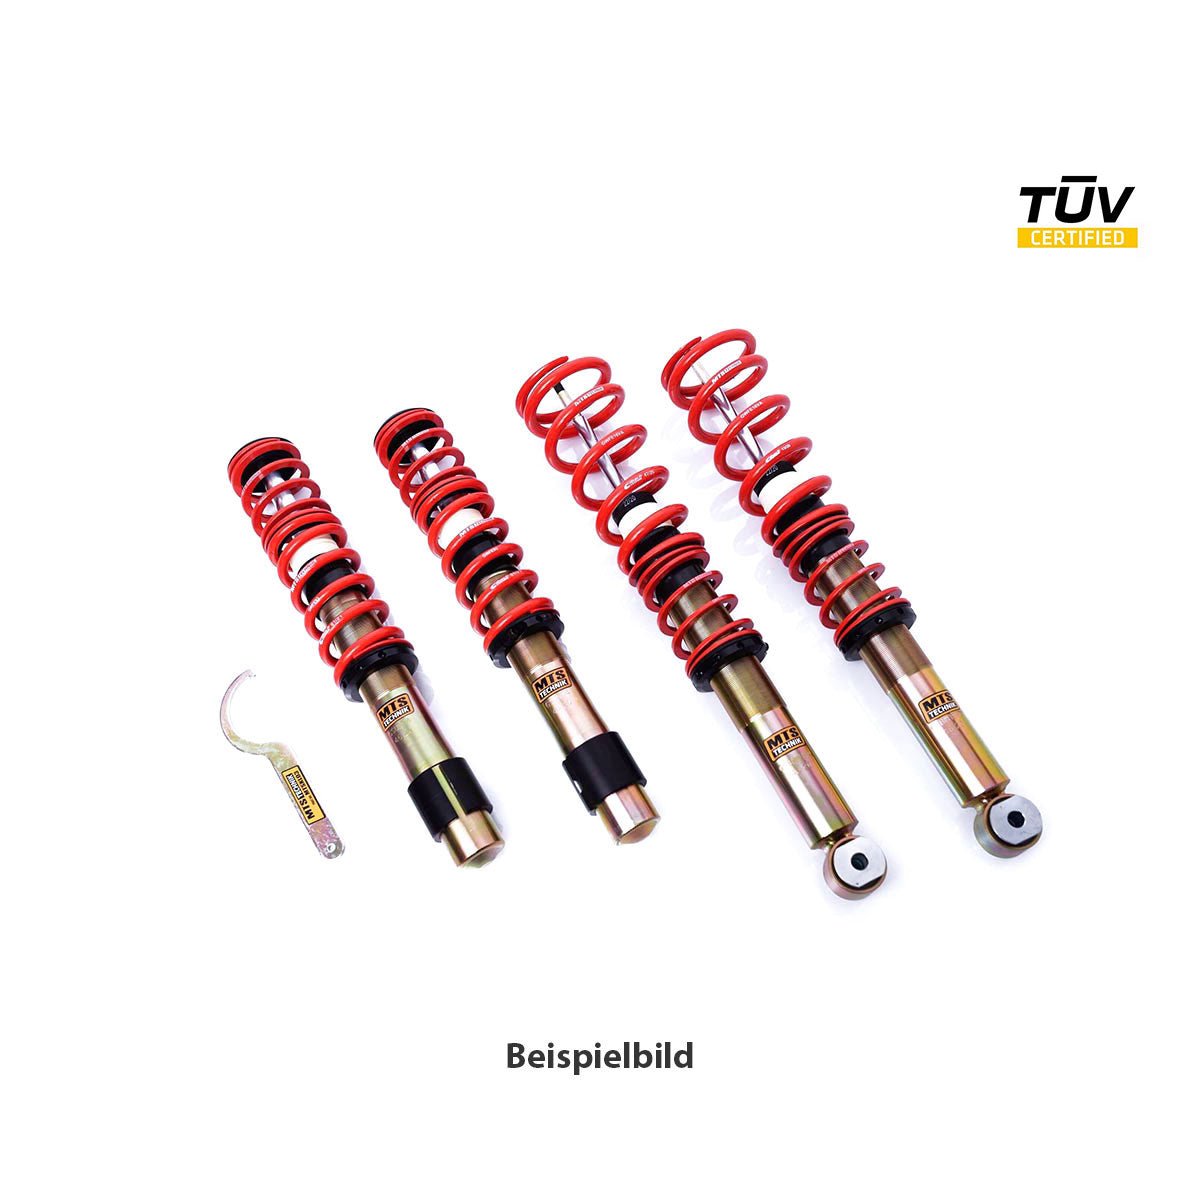 MTS TECHNIK coilover kit SPORT BMW E61 (with TÜV) - PARTS33 GmbH